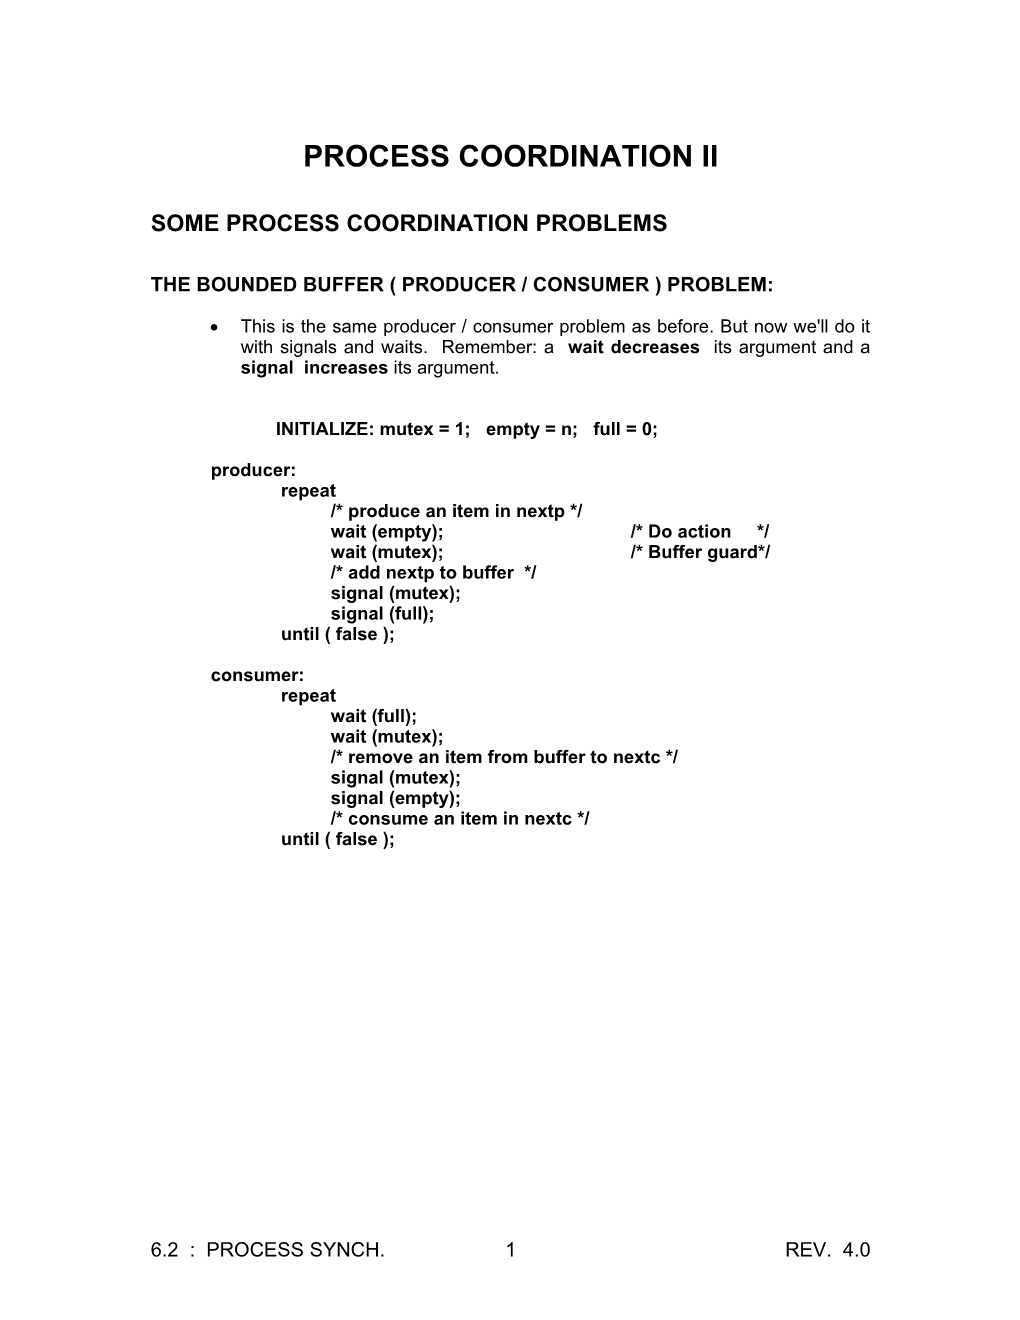 Some Process Coordination Problems